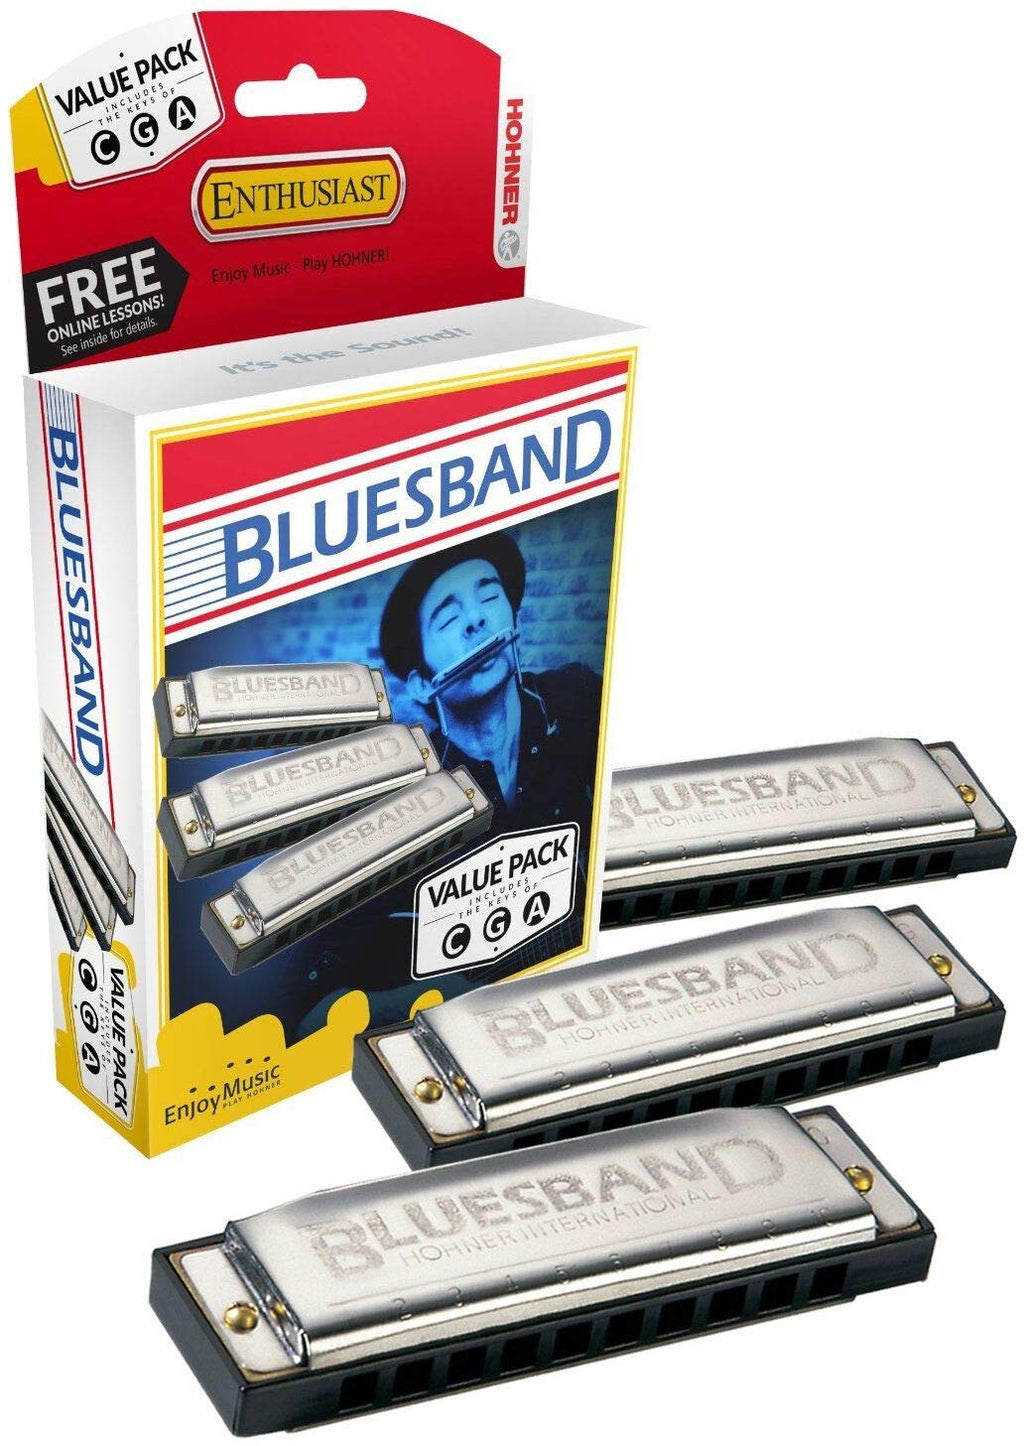 Hohner Bluesband Harmonica Set of 3 - keys of C, G and A - Value Pack